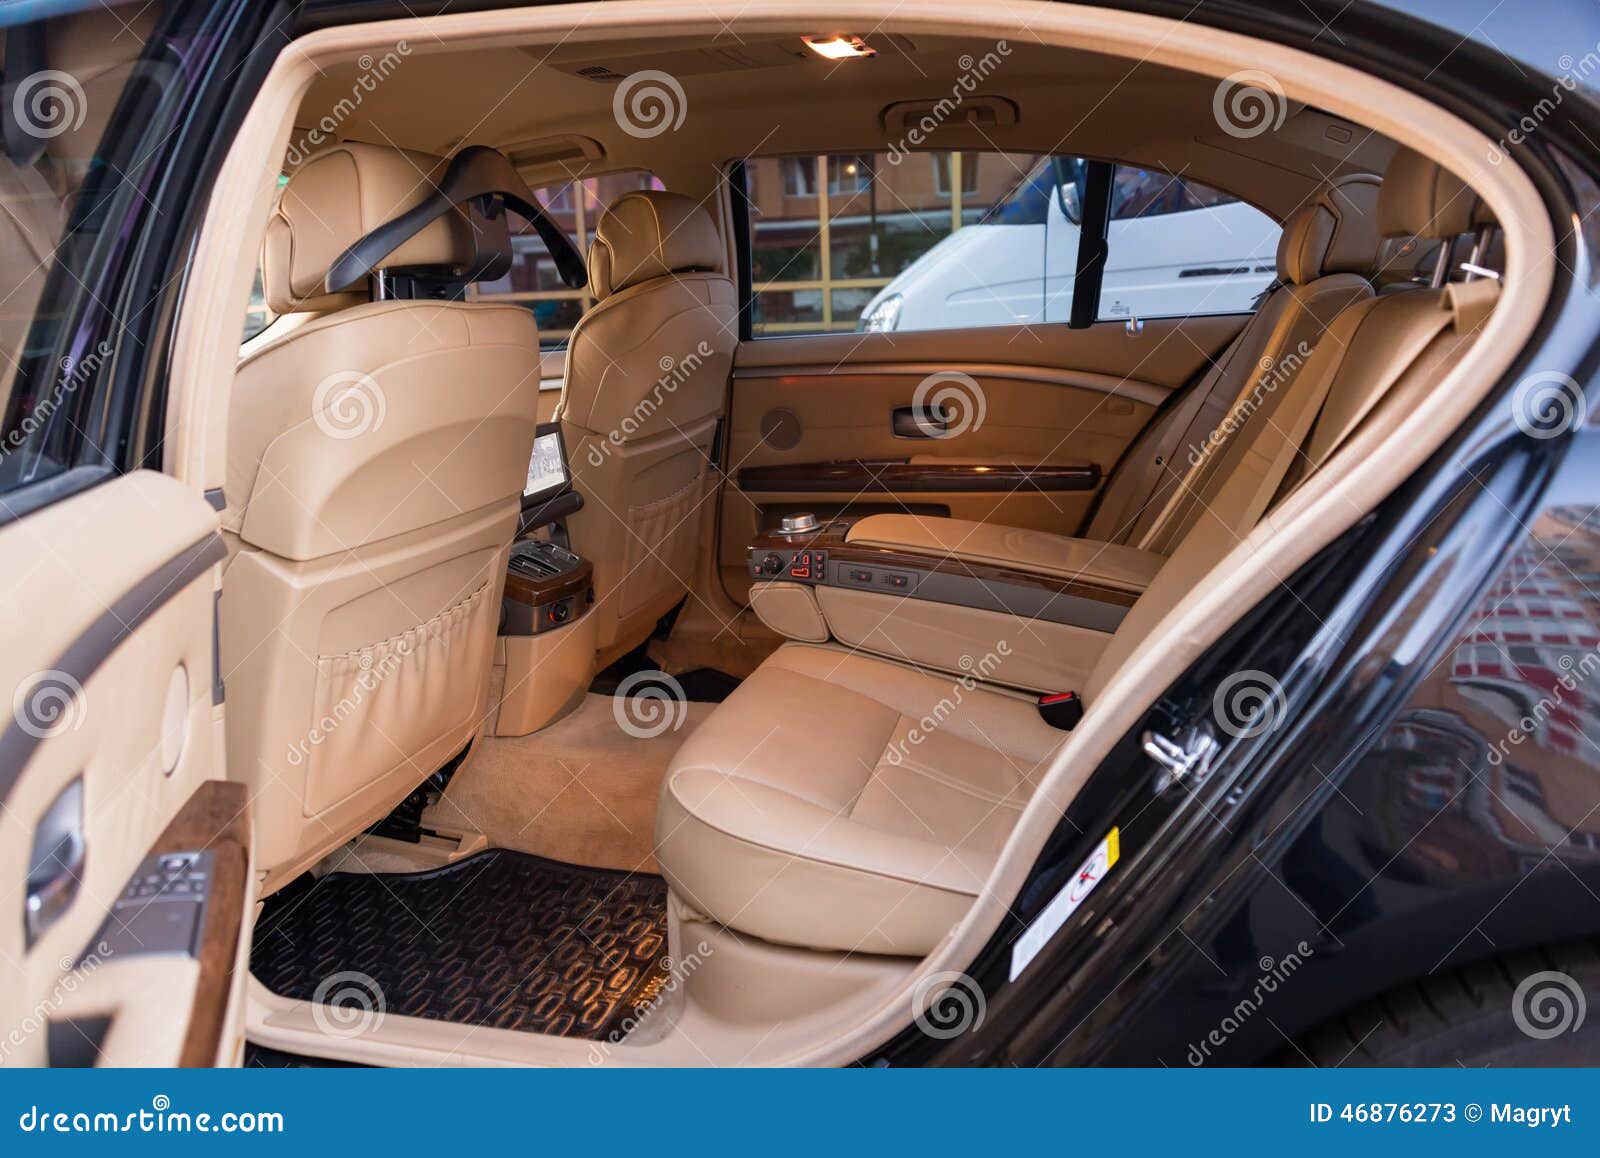 Expensive Car Interior Stock Image Image Of Sale Black